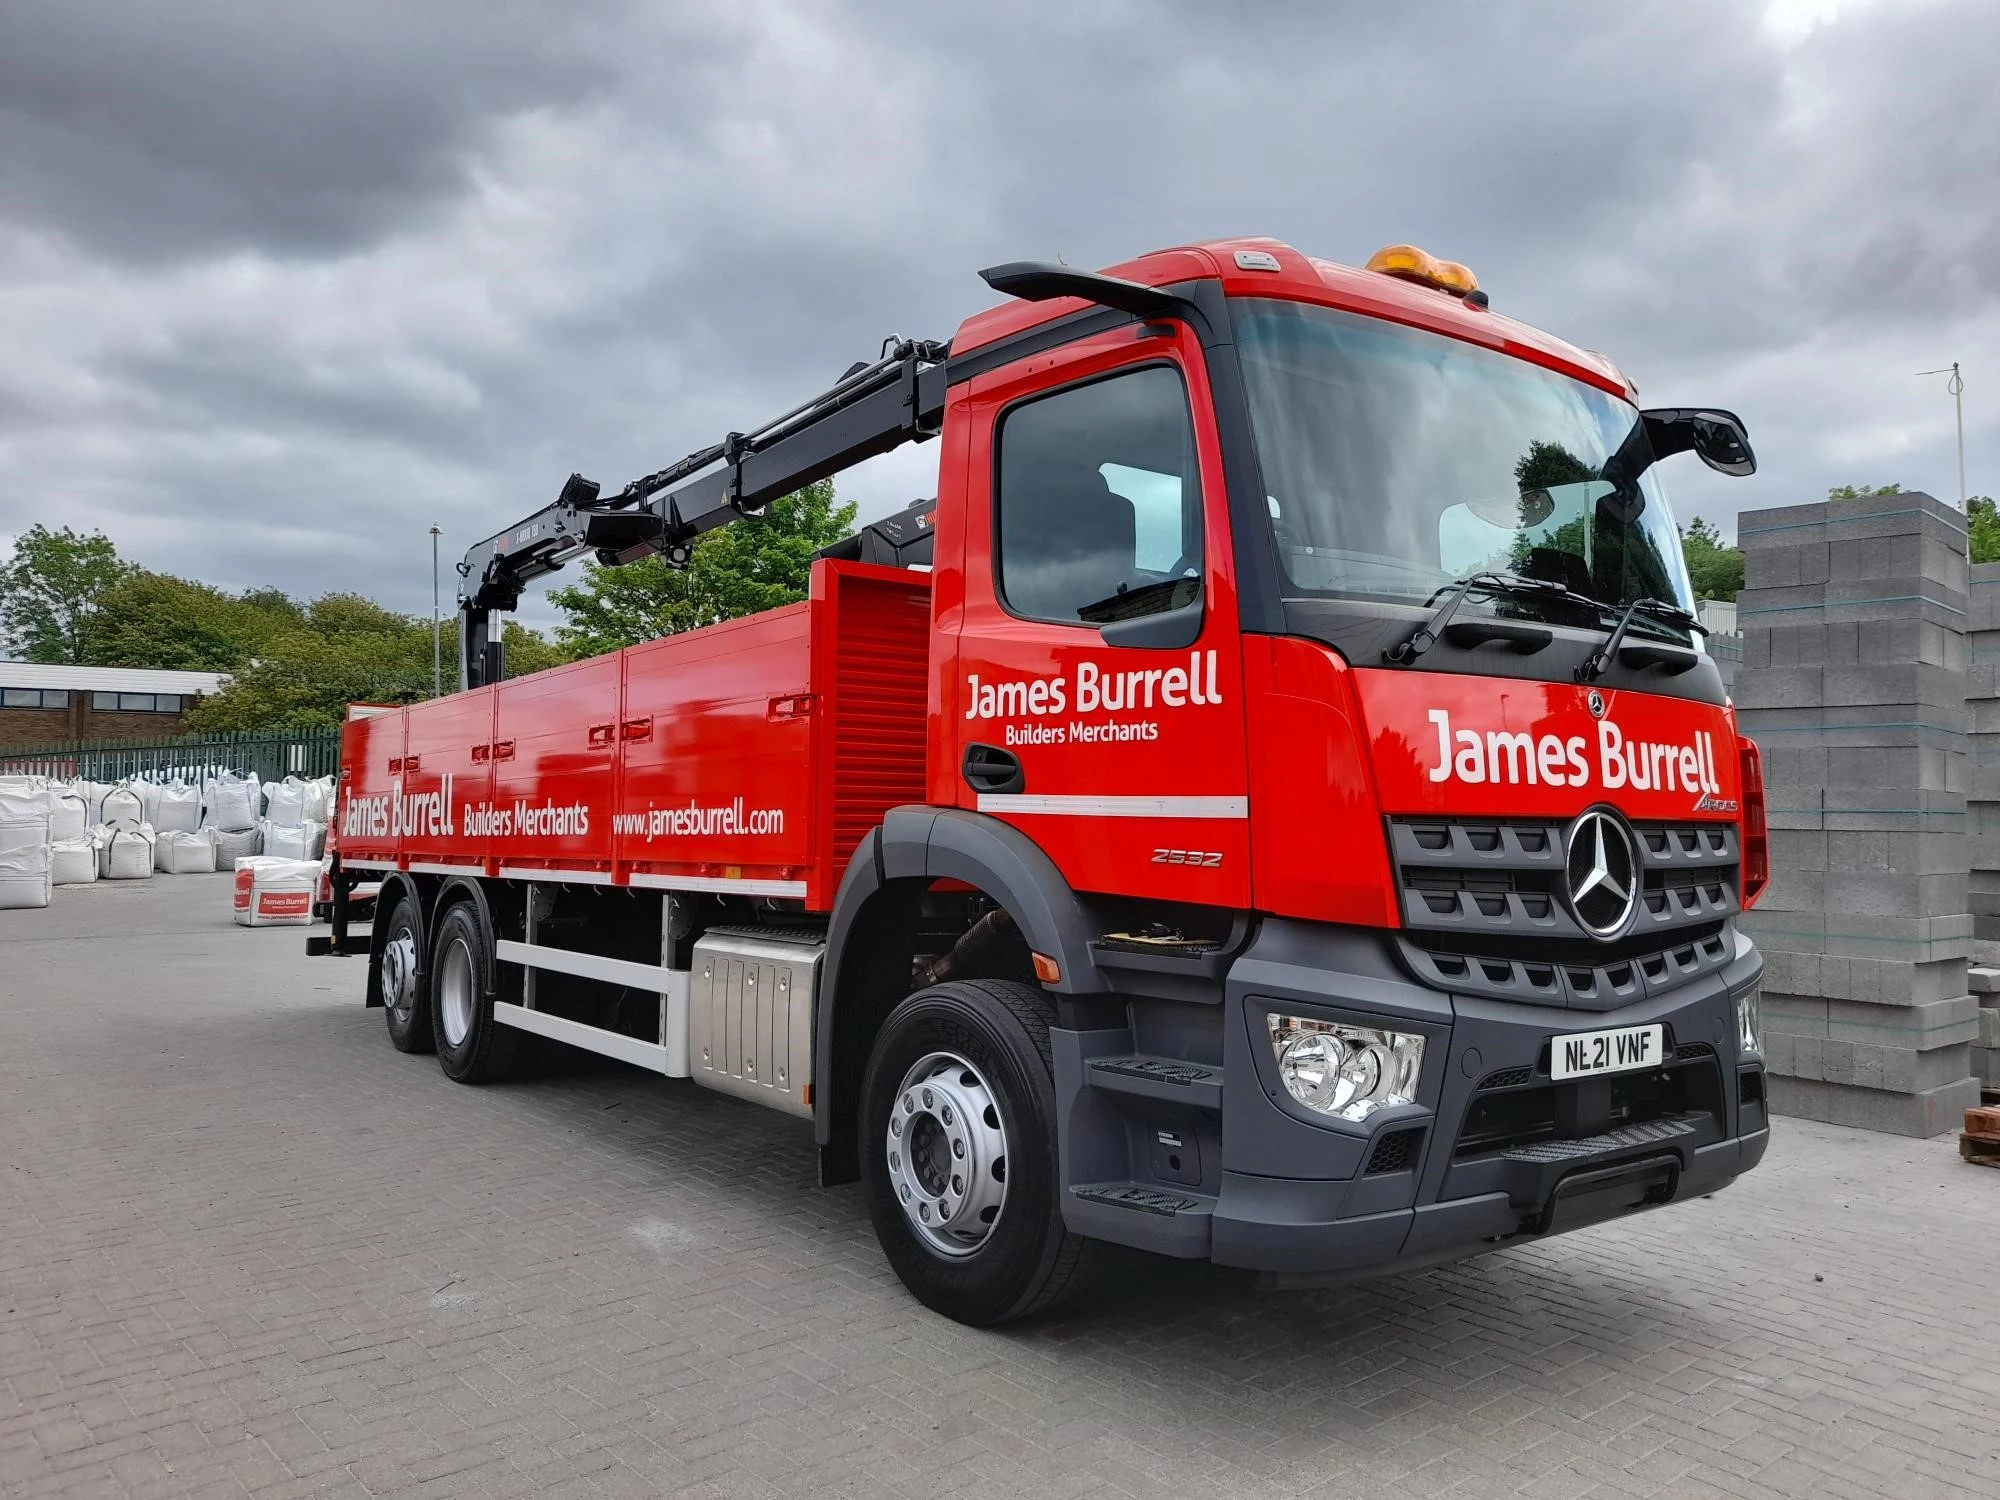 James Burrell continues reinvestment drive.